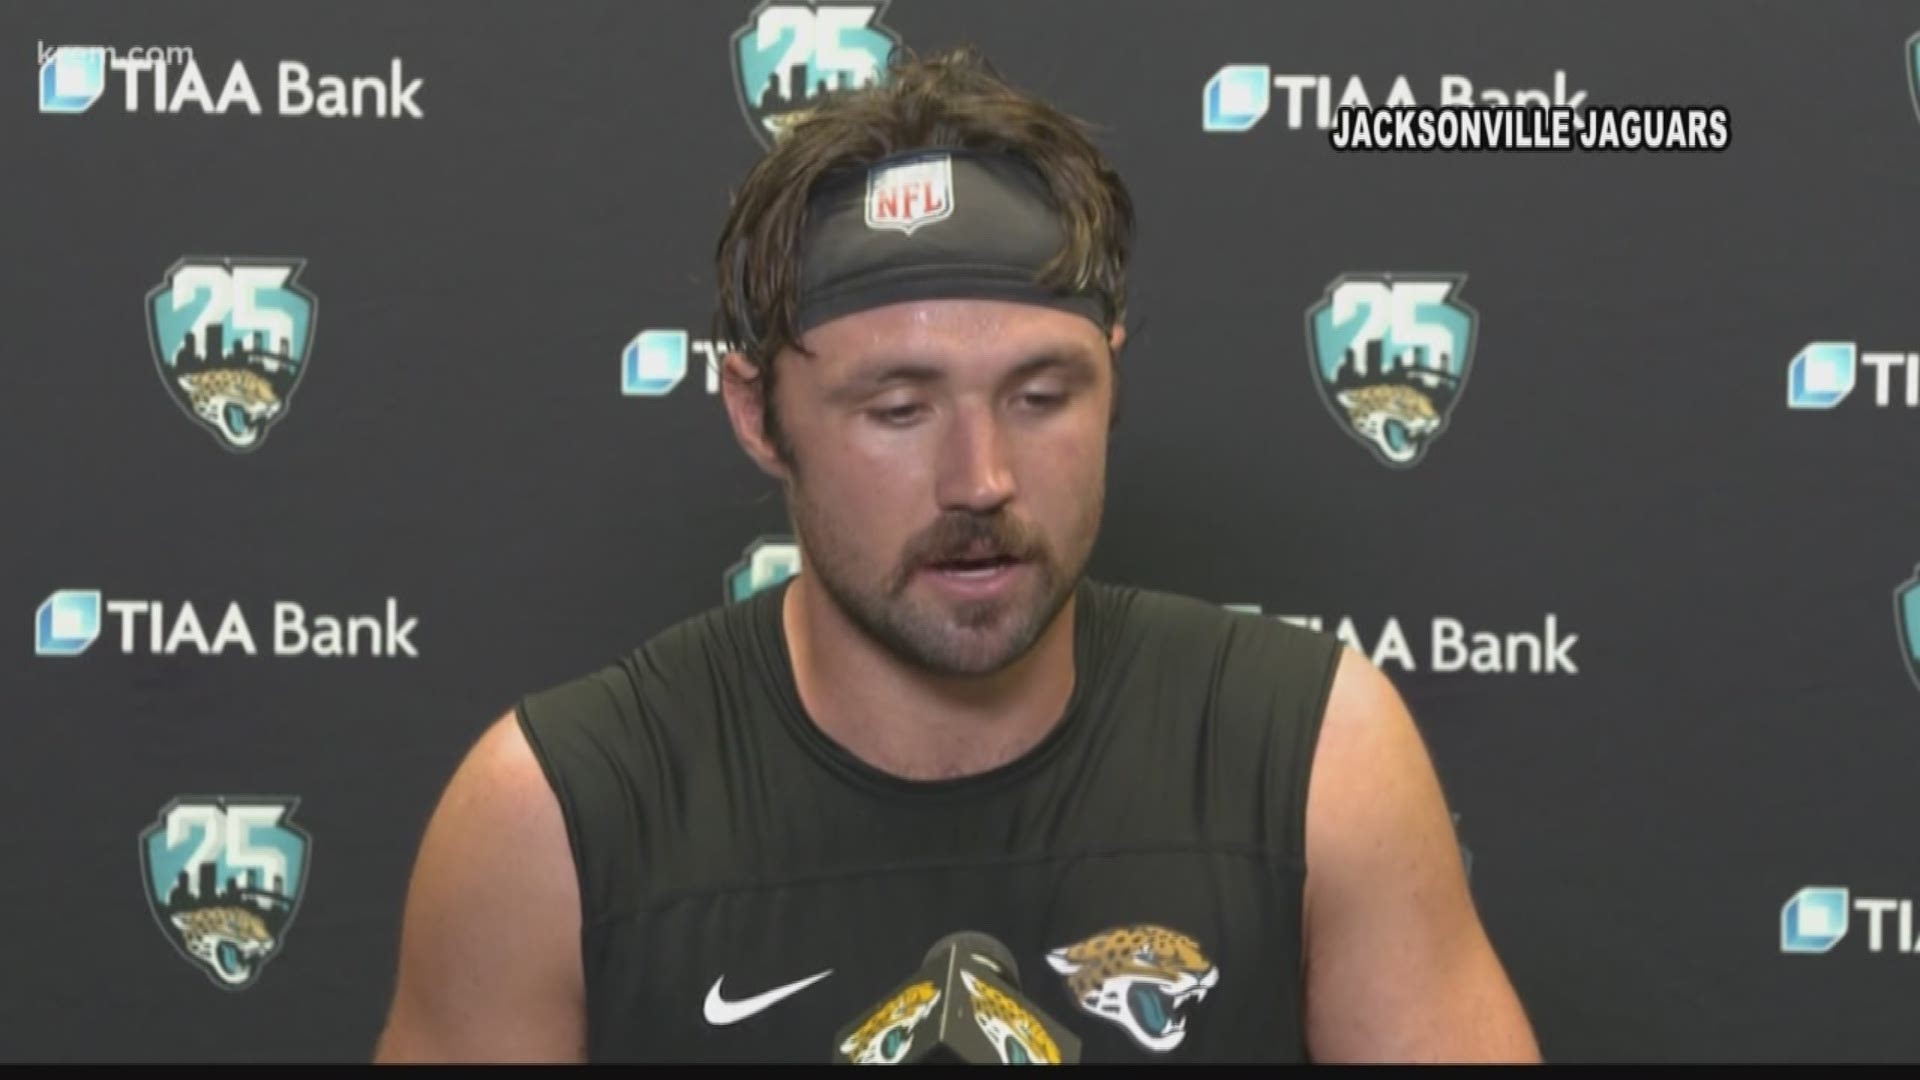 Minshew is preparing for his first NFL start on Saturday for the Jacksonville Jaguars after QB Nick Foles broke his collarbone.